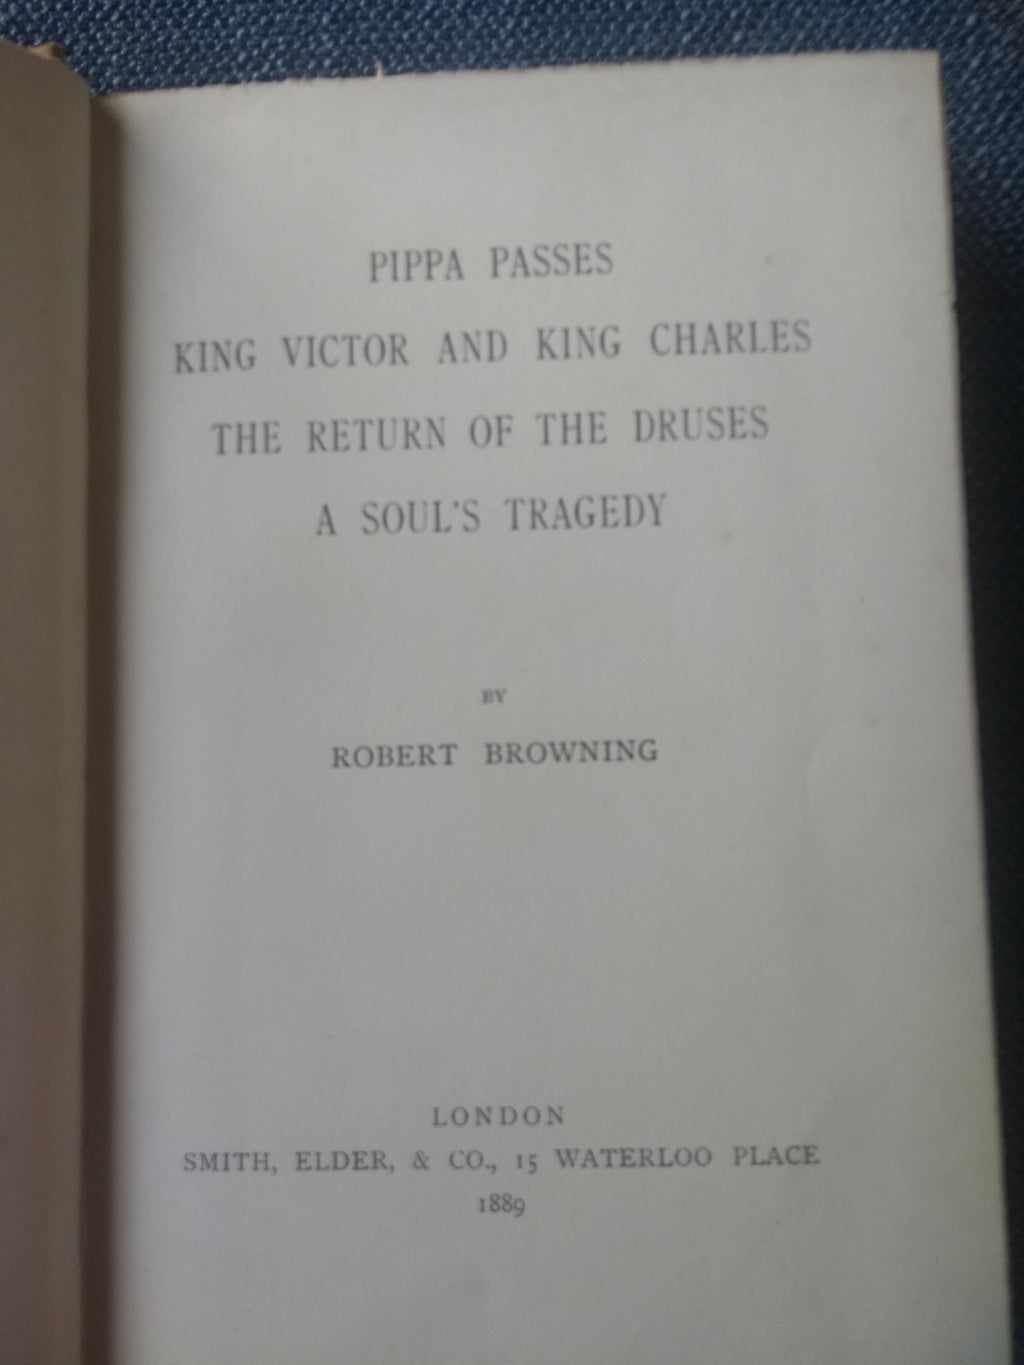 Pippa Passes; King Victor and King Charles; The Return of the Druses; A Soul's Tragedy, by Robert Browning